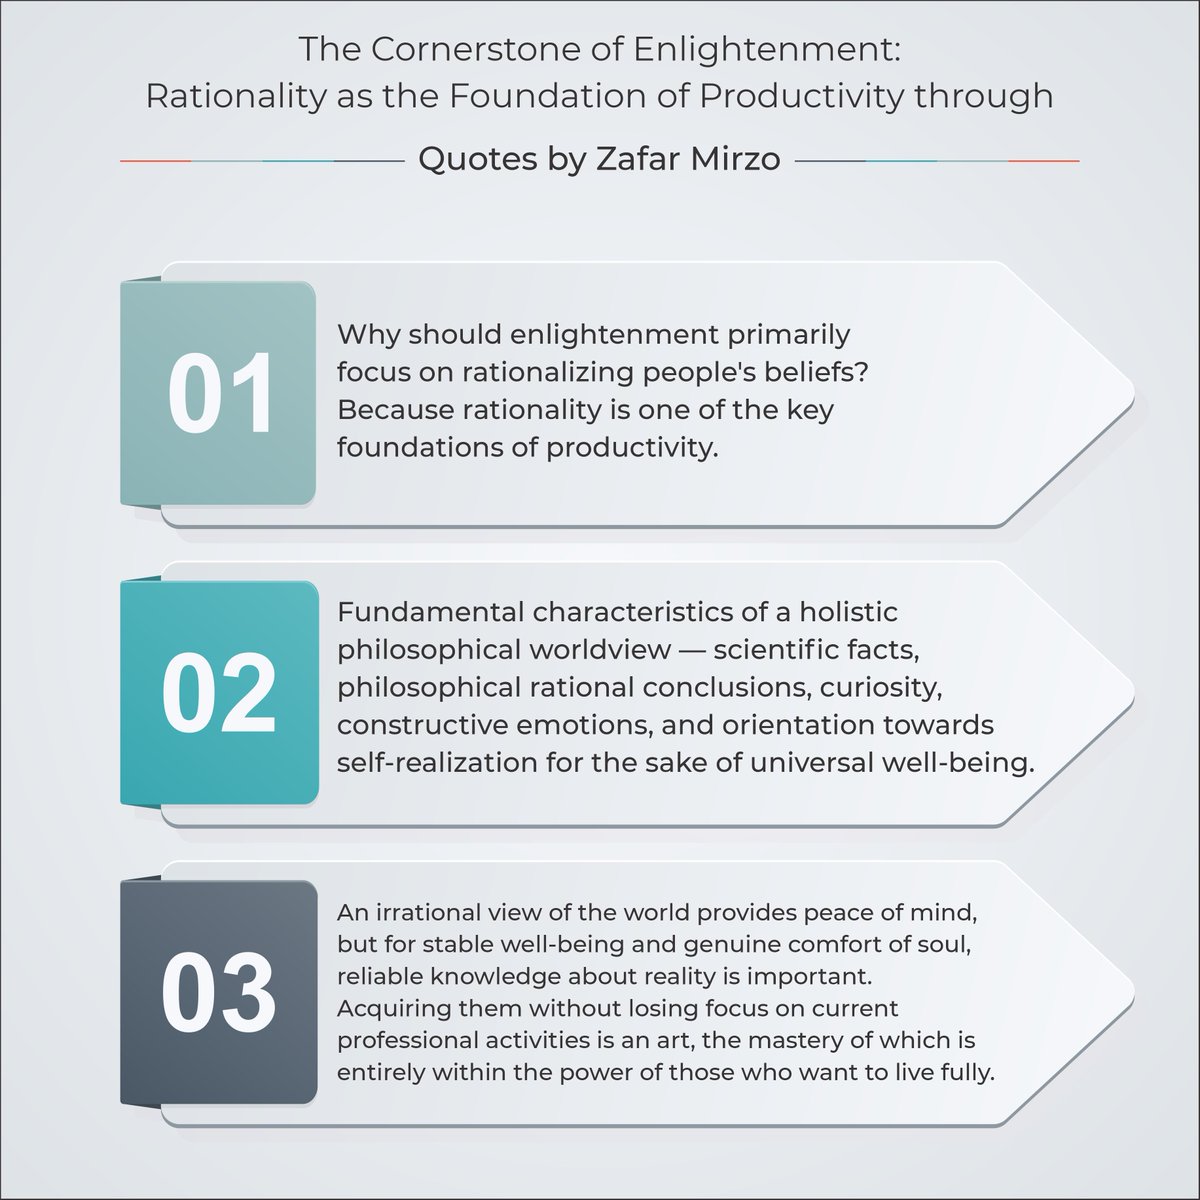 The Cornerstone of Enlightenment: Rationality as the Foundation of Productivity. Three quotes by Zafar Mirzo. 1. Why should enlightenment primarily focus on rationalizing people's beliefs? Because rationality is one of the key foundations of productivity. 2. Fundamental…